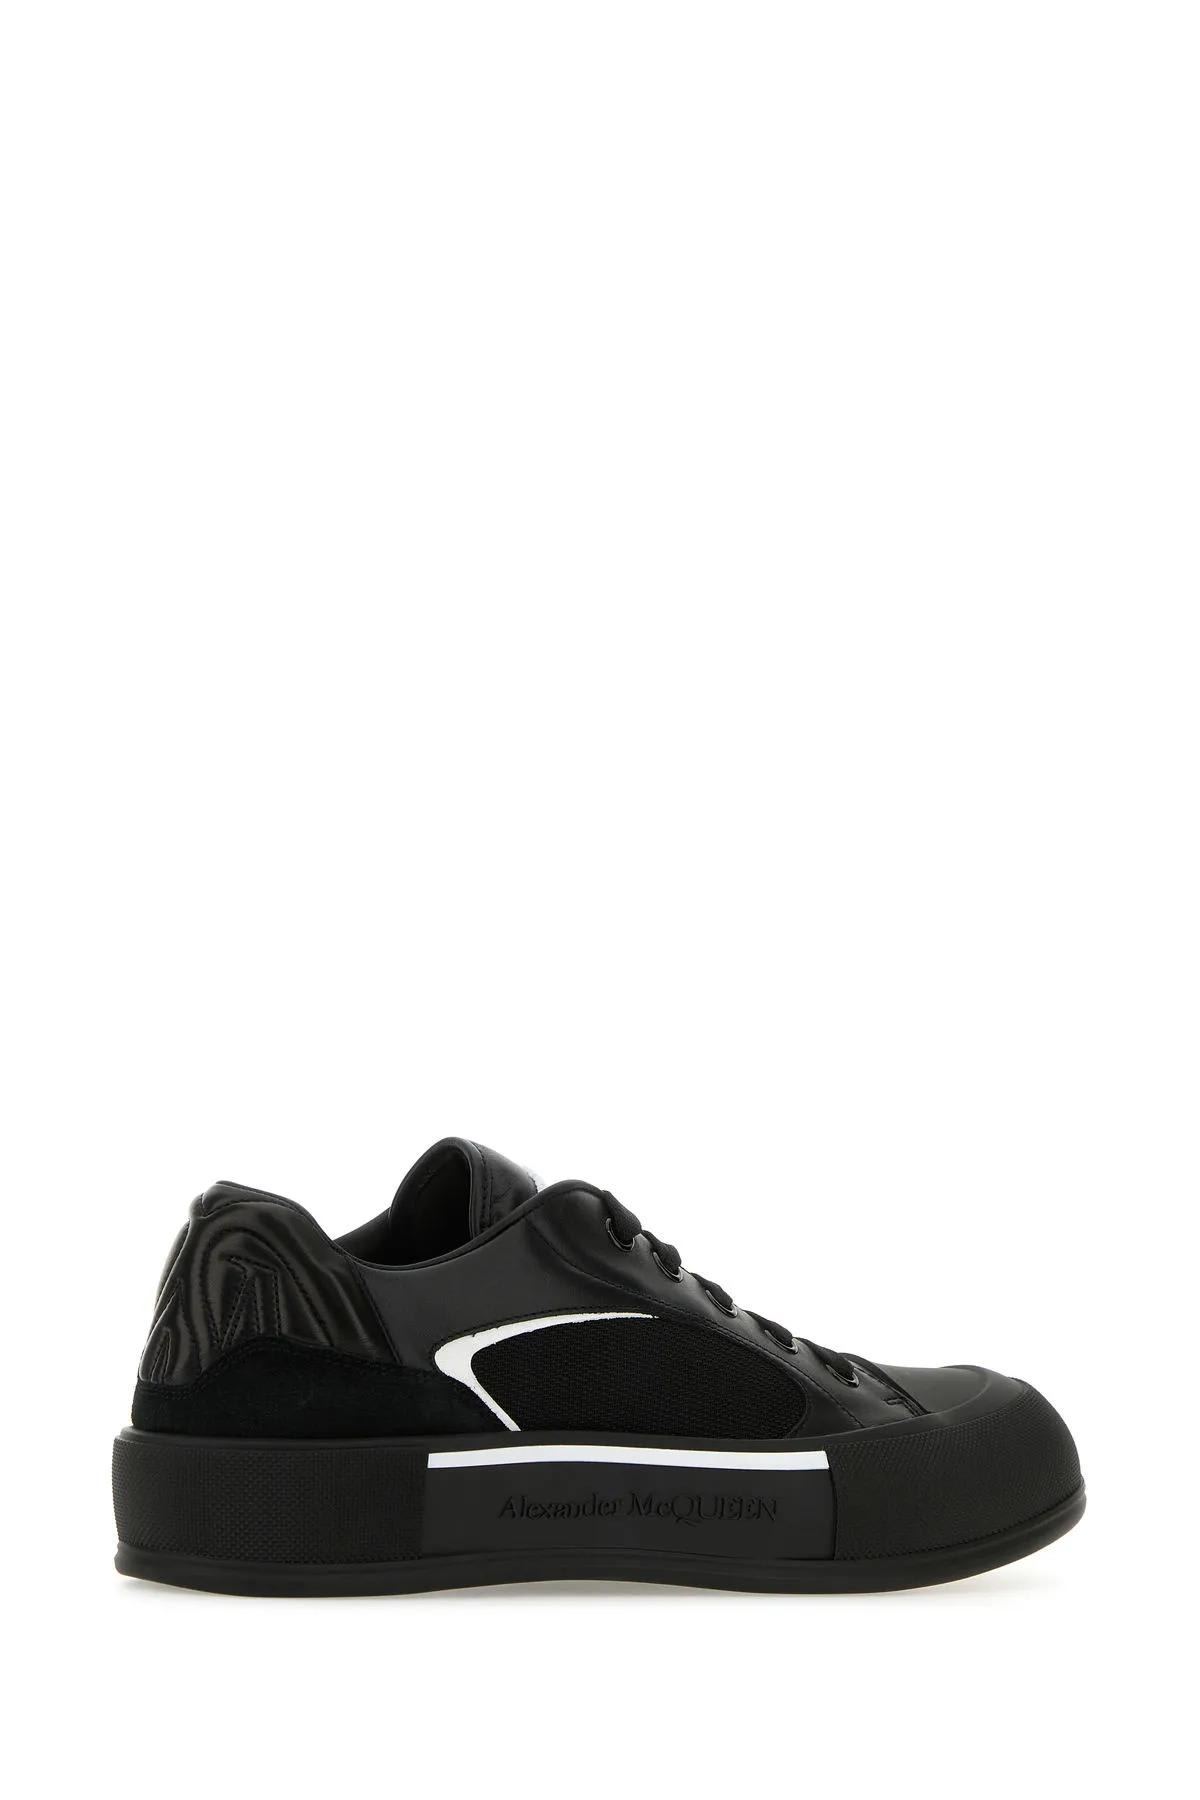 Shop Alexander Mcqueen Black Nylon And Leather Plimsoll Sneakers